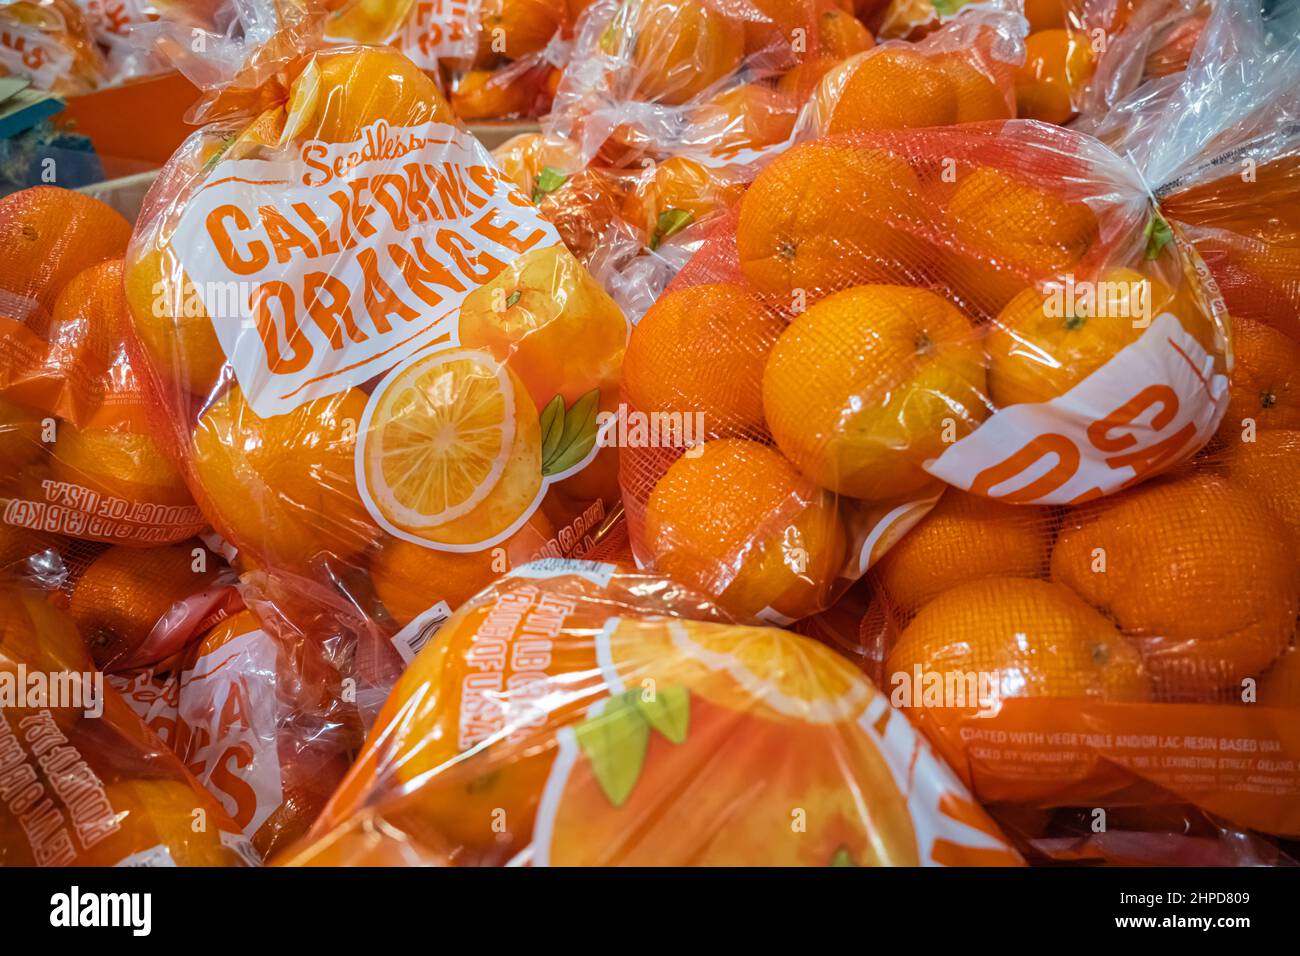 California oranges on display at Sam's Club warehouse store in Snellville, Georgia. (USA) Stock Photo